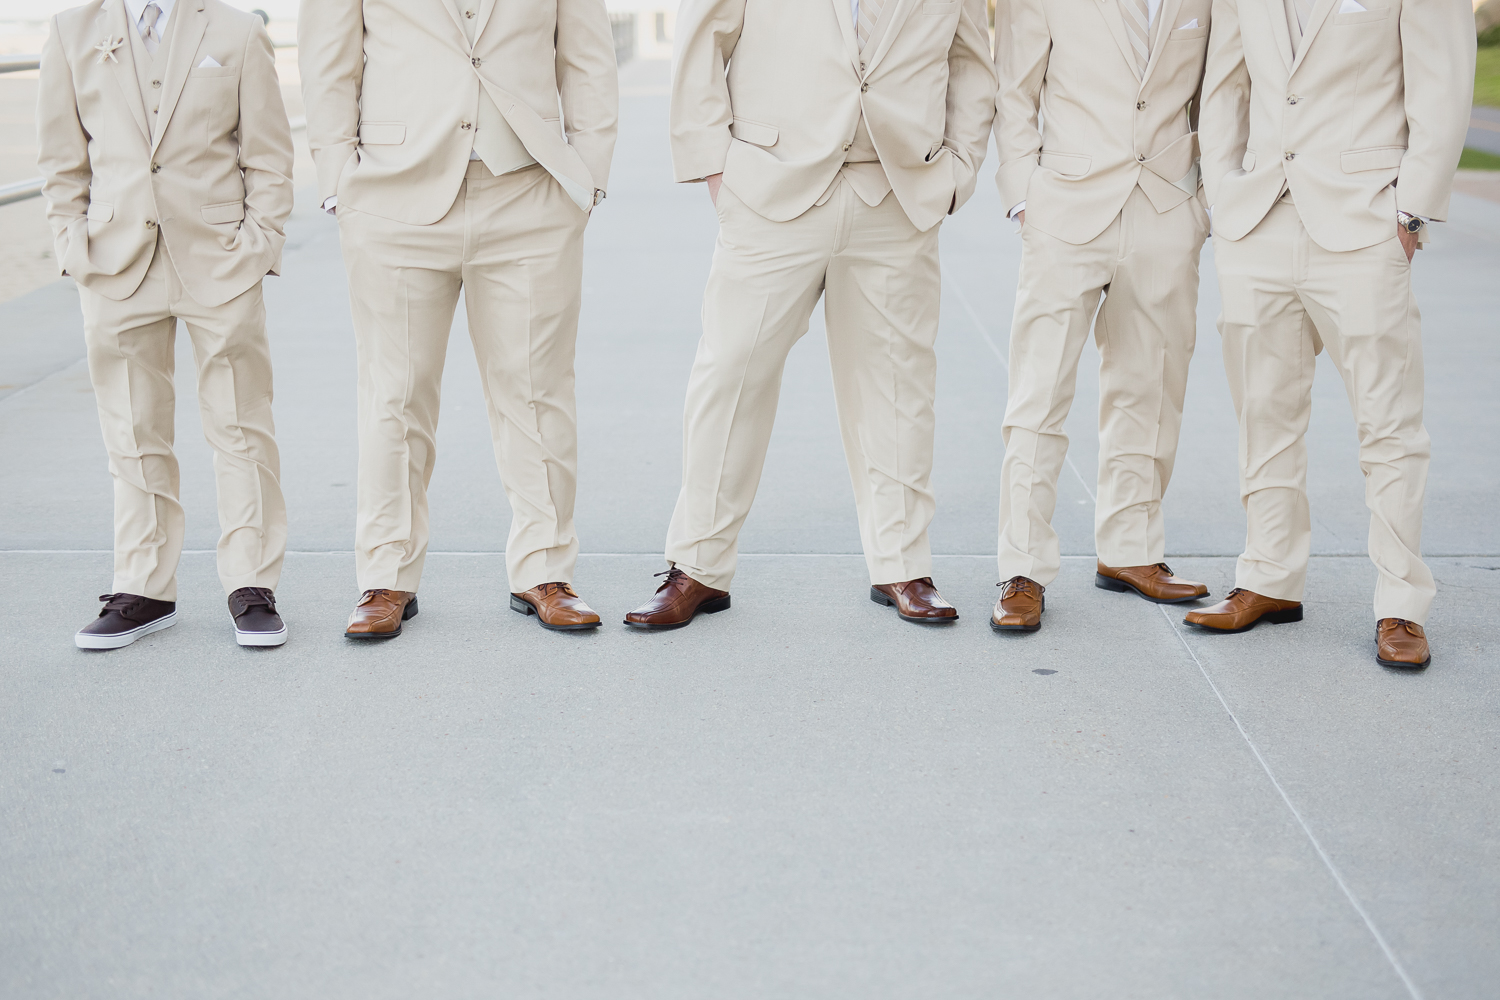 Wedding Photo Poses Must Haves That Save Time With Bridal Party